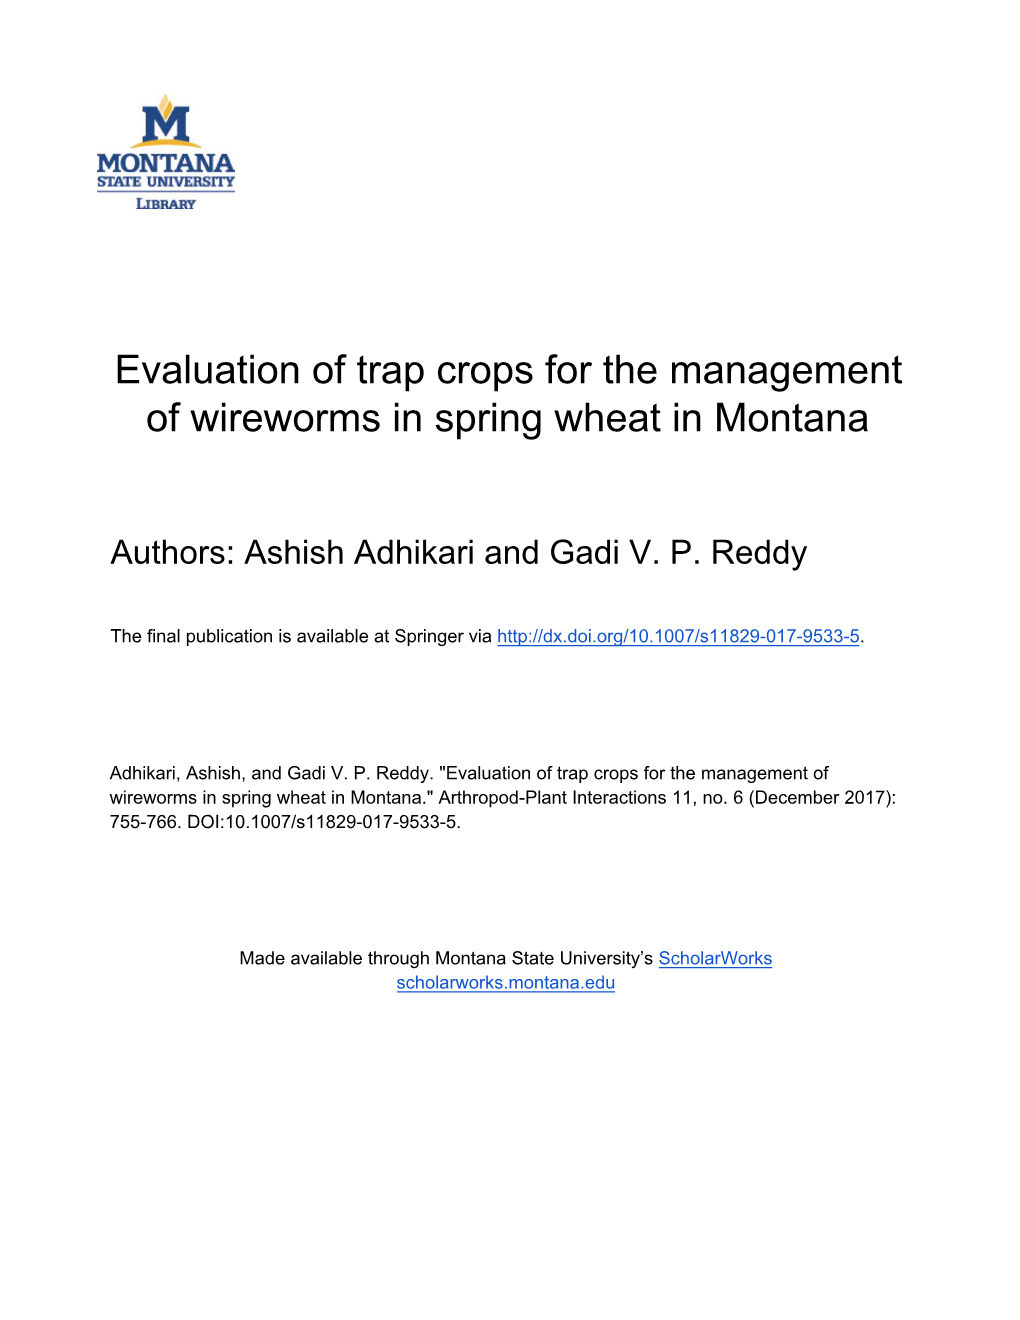 Evaluation of Trap Crops for the Management of Wireworms in Spring Wheat in Montana